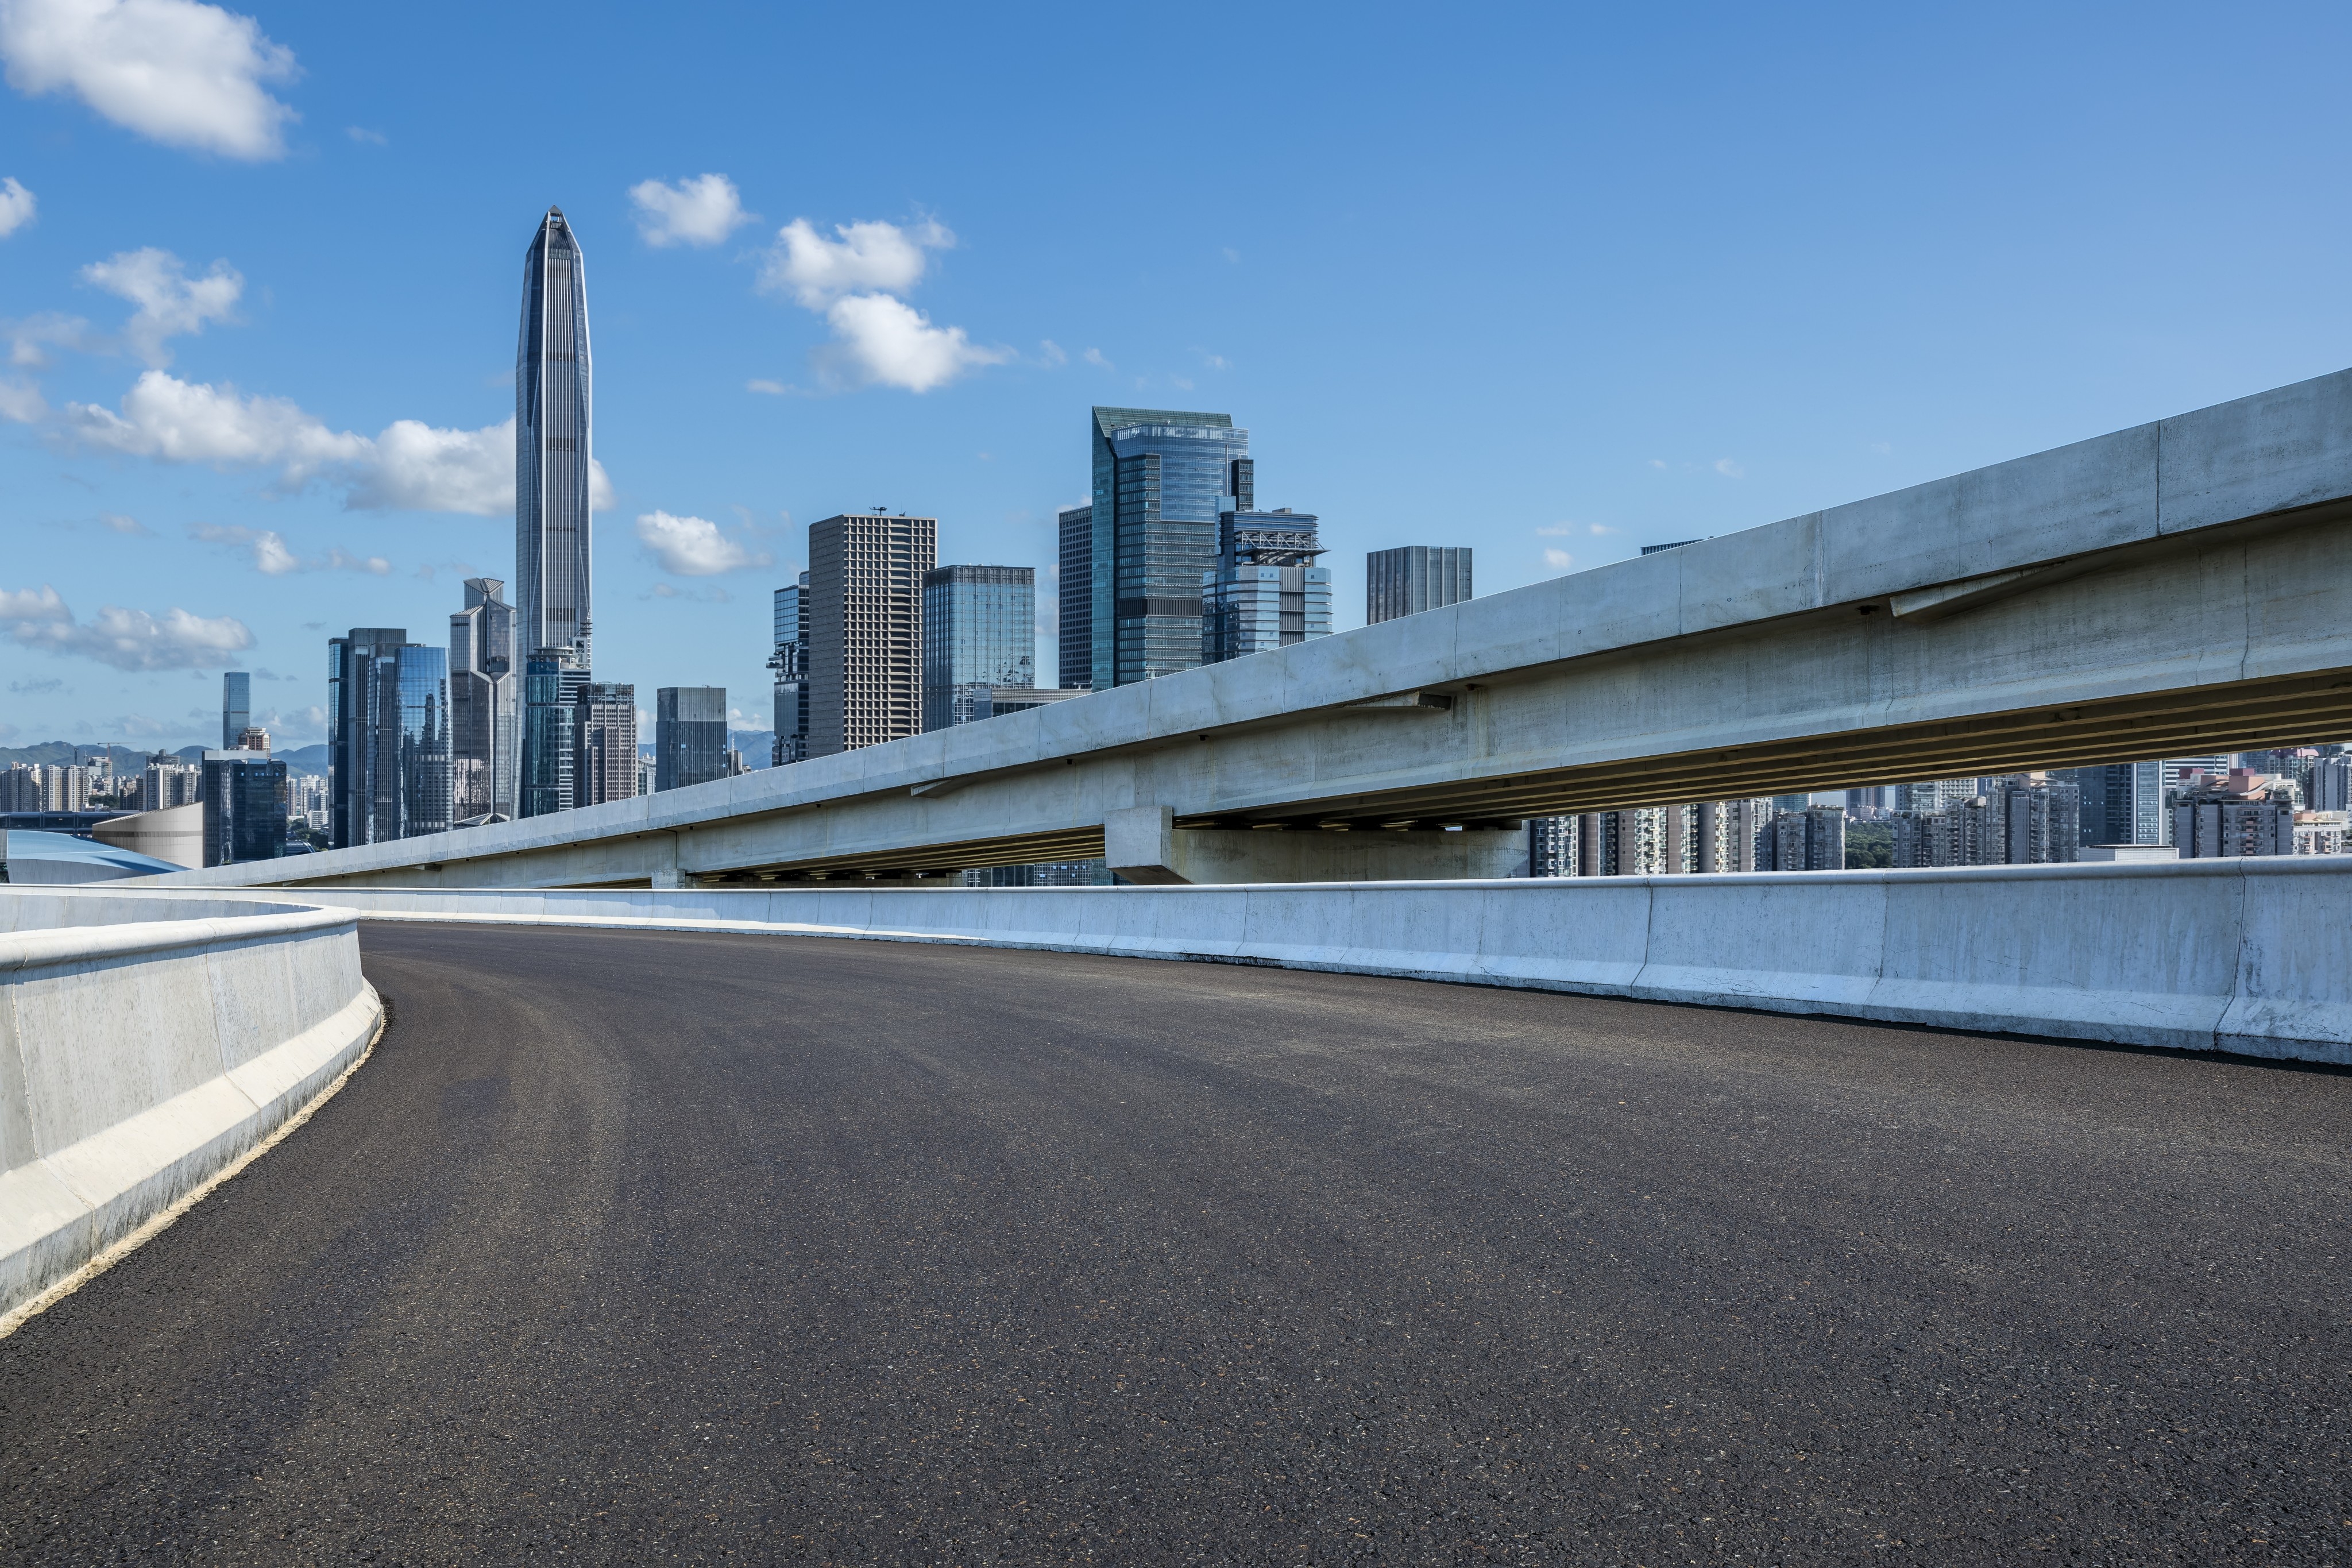 Shenzhen municipal authorities have already completed the assessment of certain sections of four city highways – with a total length of 89 kilometres – for autonomous vehicle trials. Photo: Shutterstock